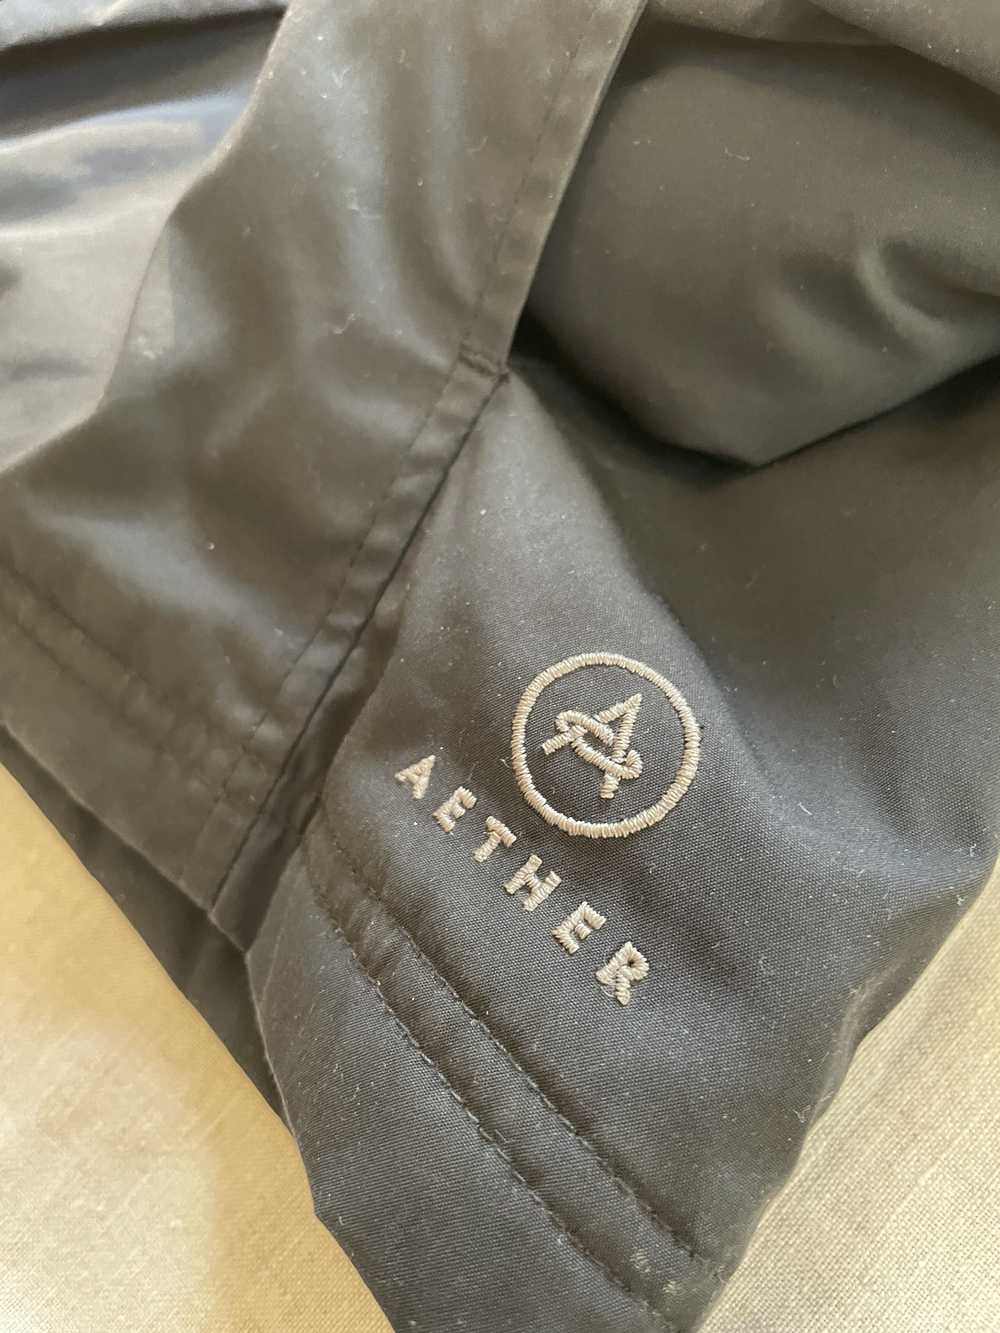 Aether Apparel Anorak - image 5